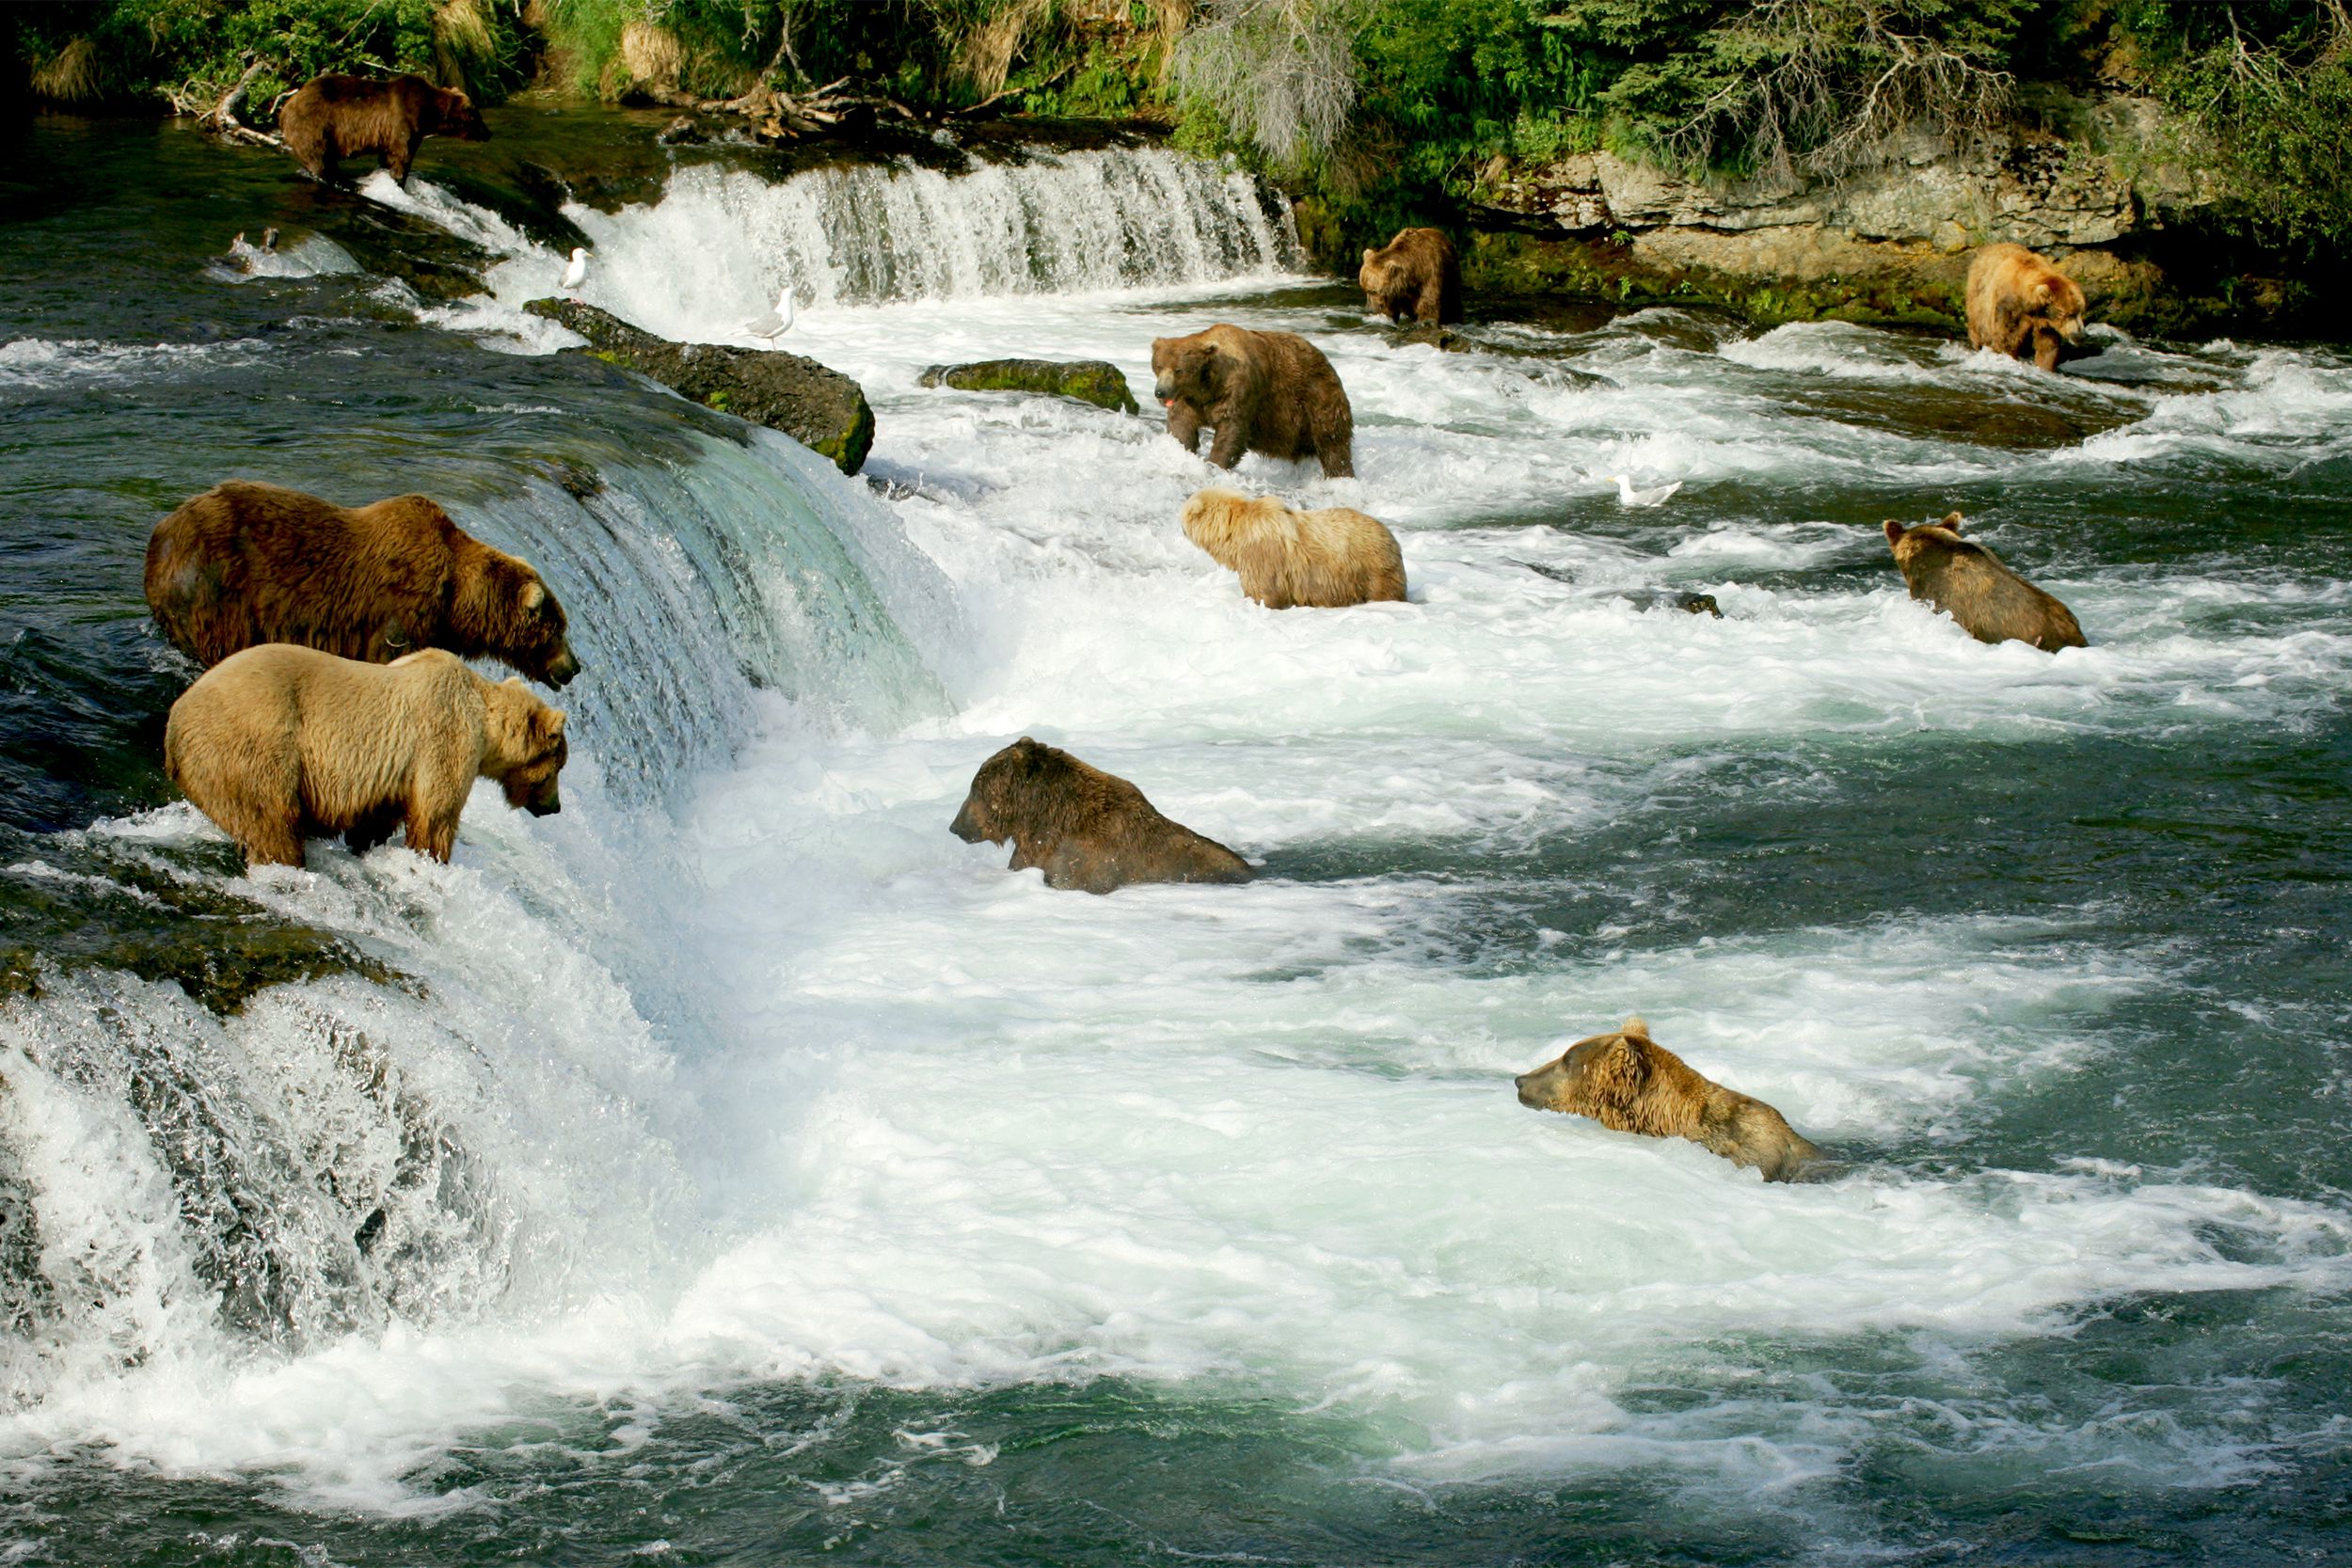 <p>A national park that dates back to 1918, <a href="https://www.nps.gov/katm/index.htm">Katmai</a> was created to protect a volcanically devastated region. Today, it is perhaps best known as an important habitat for salmon and brown bears. </p>